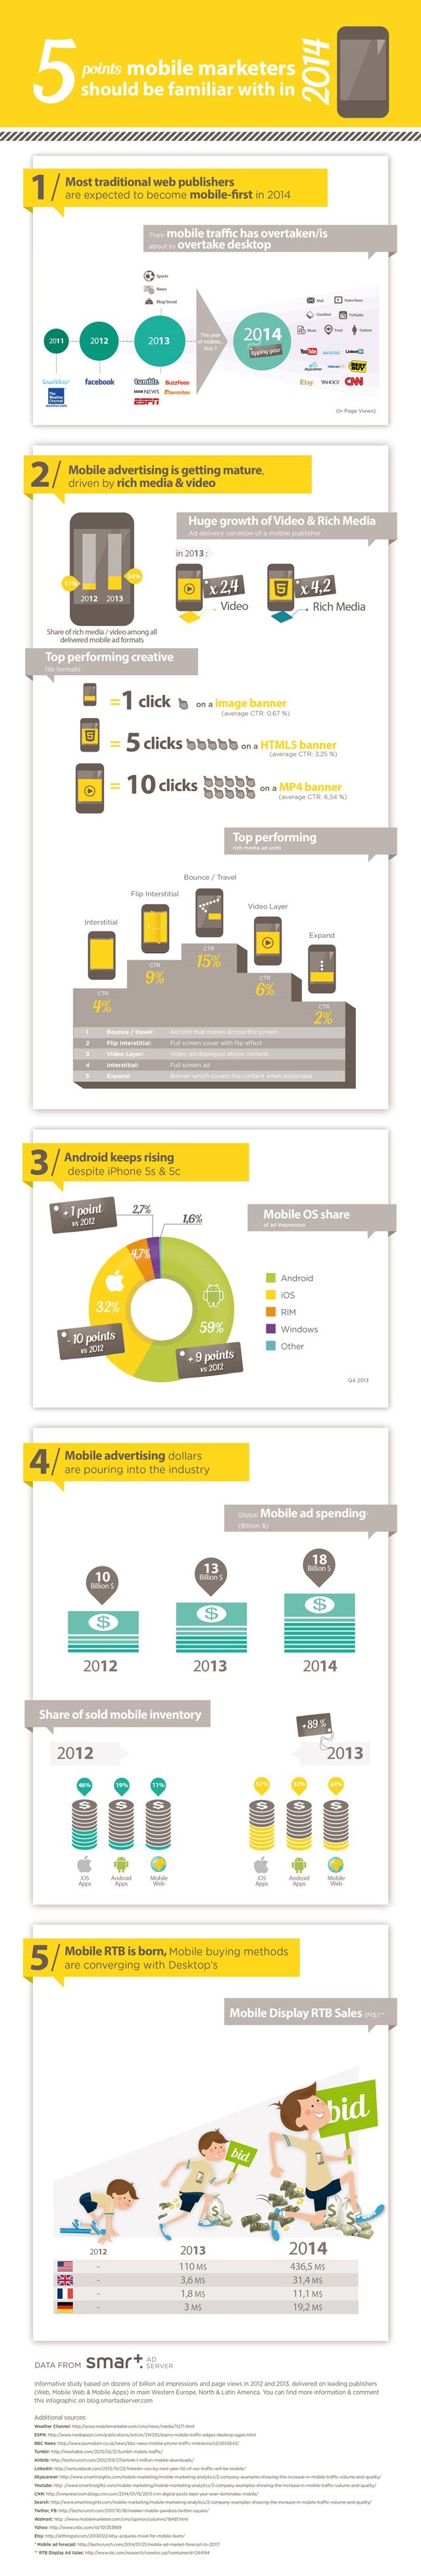 Five Points for Mobile Marketers to Consider in 2014